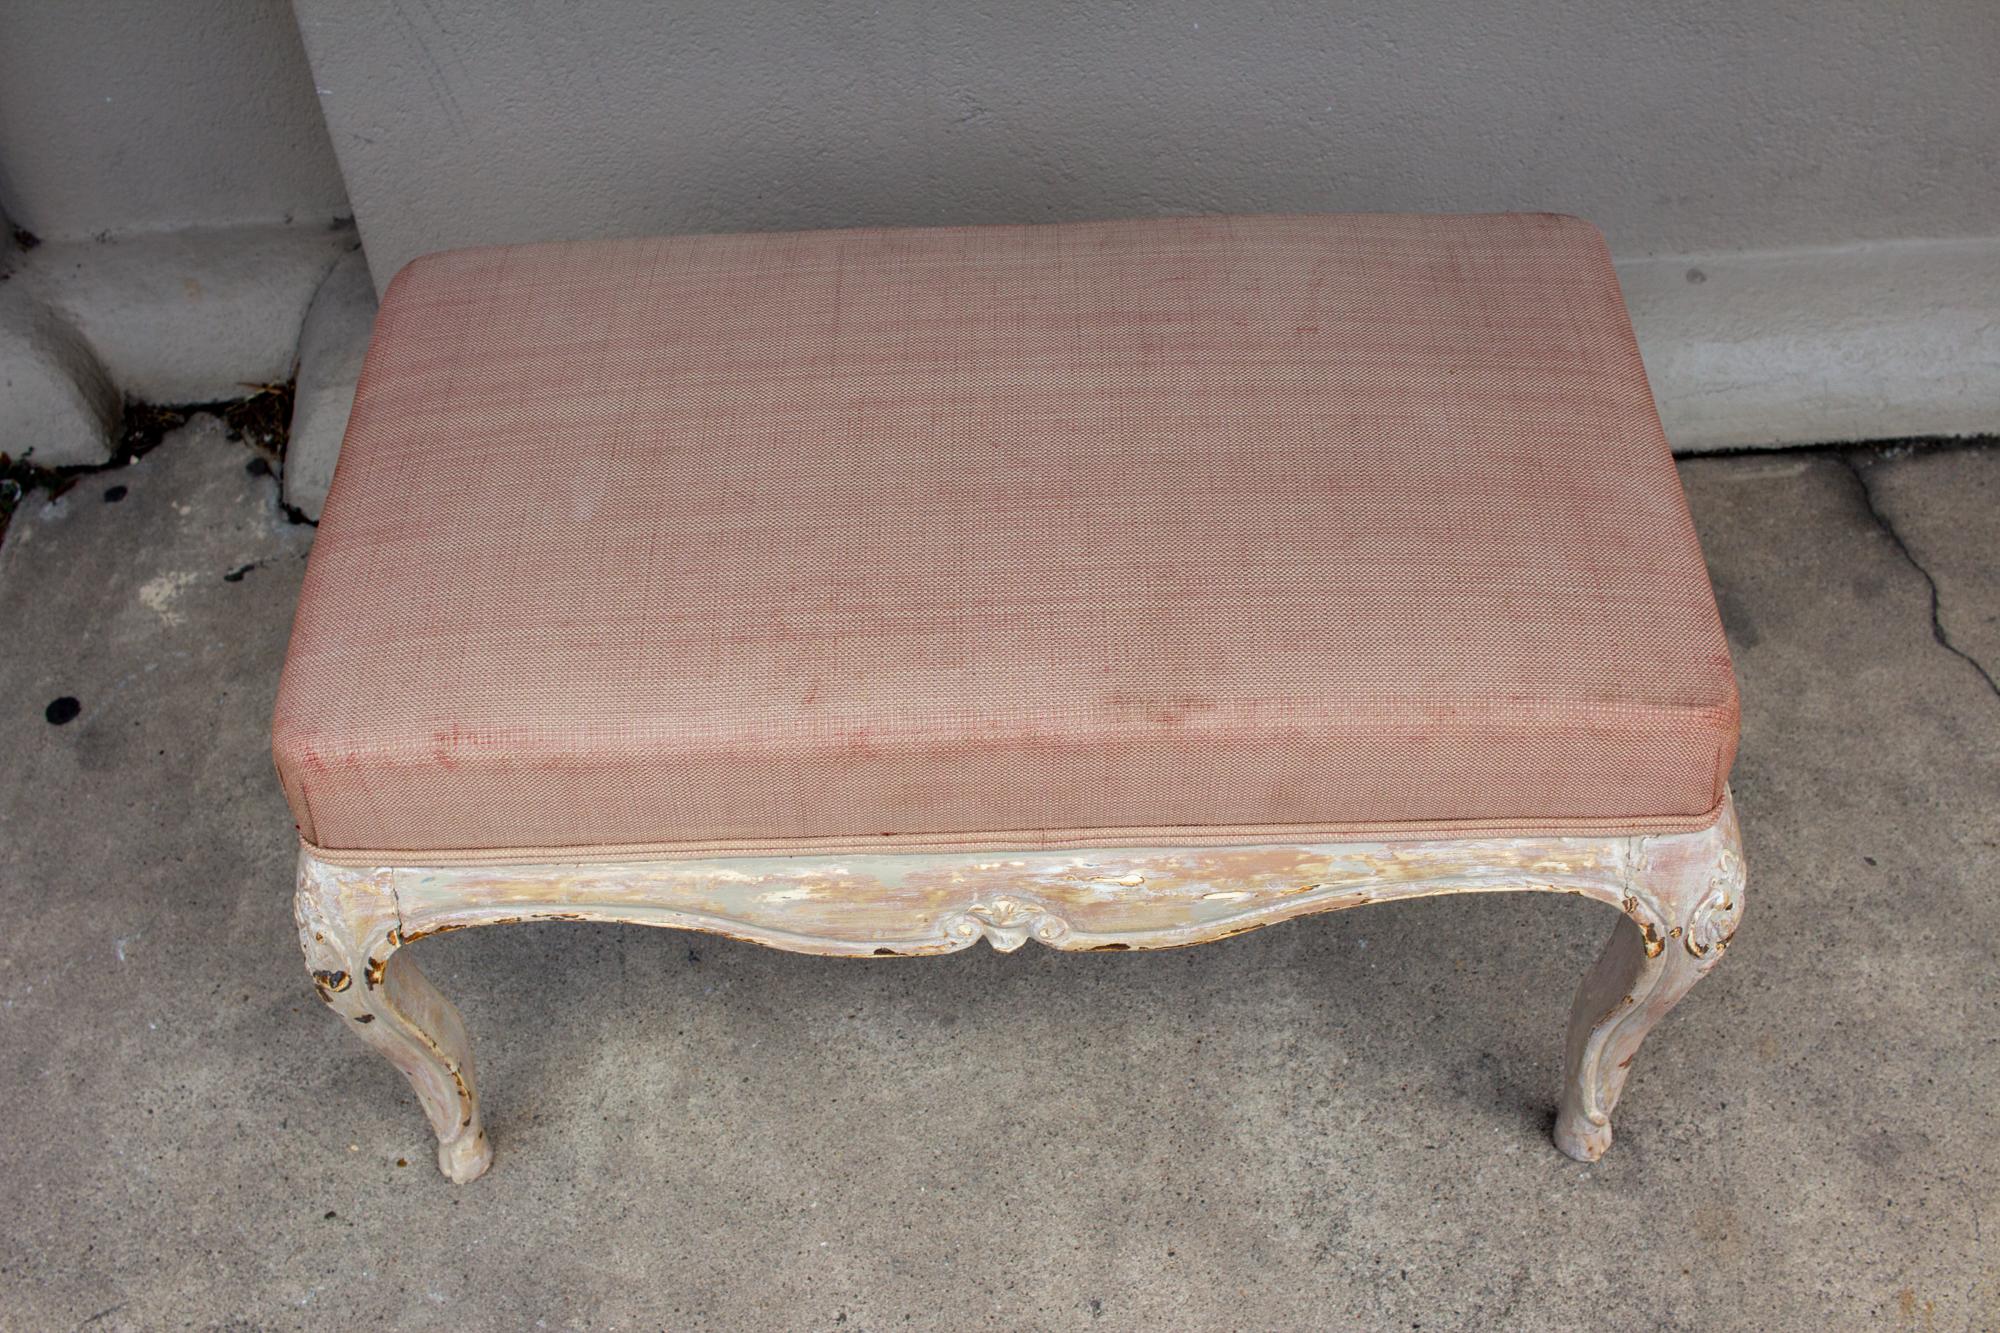 This is an antique French carved wood bench with dusty pink upholstery and a distressed painted finish. The decoration on the wood base includes Fleur de Lis shapes, scrolls and tapered, curved legs. The painted finish has tones of cream, grey and